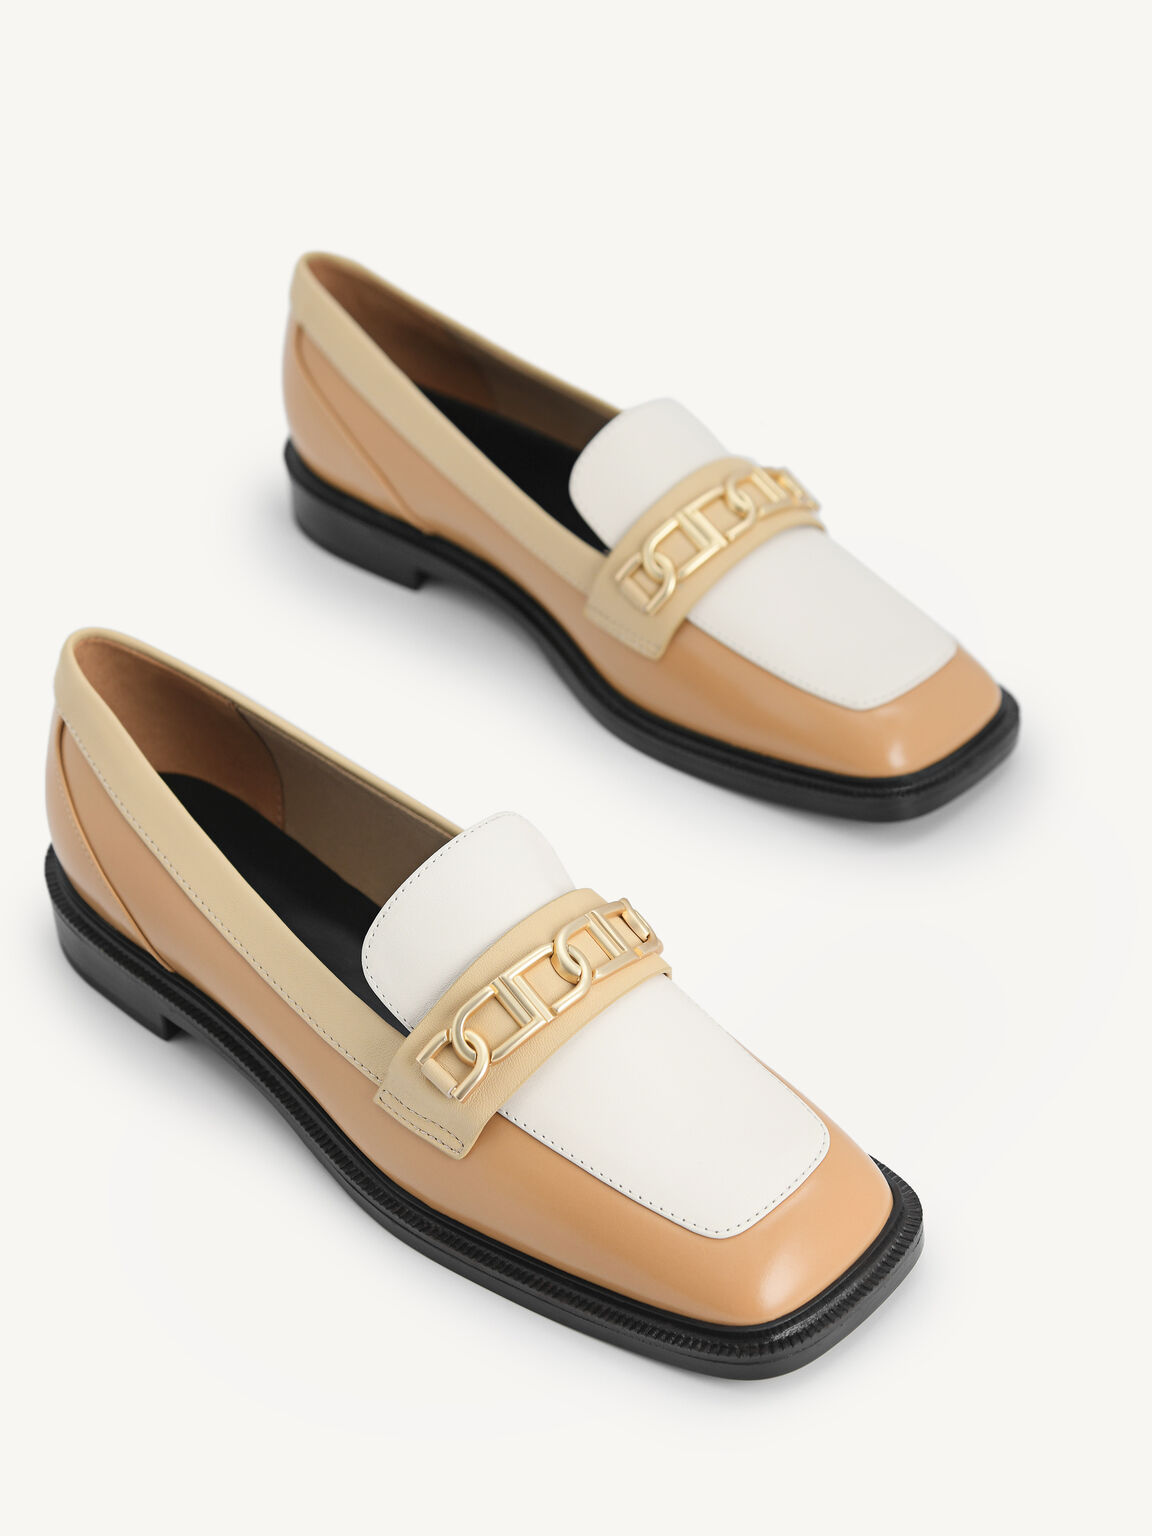 Icon Leather Square Toe Loafers, Camel, hi-res